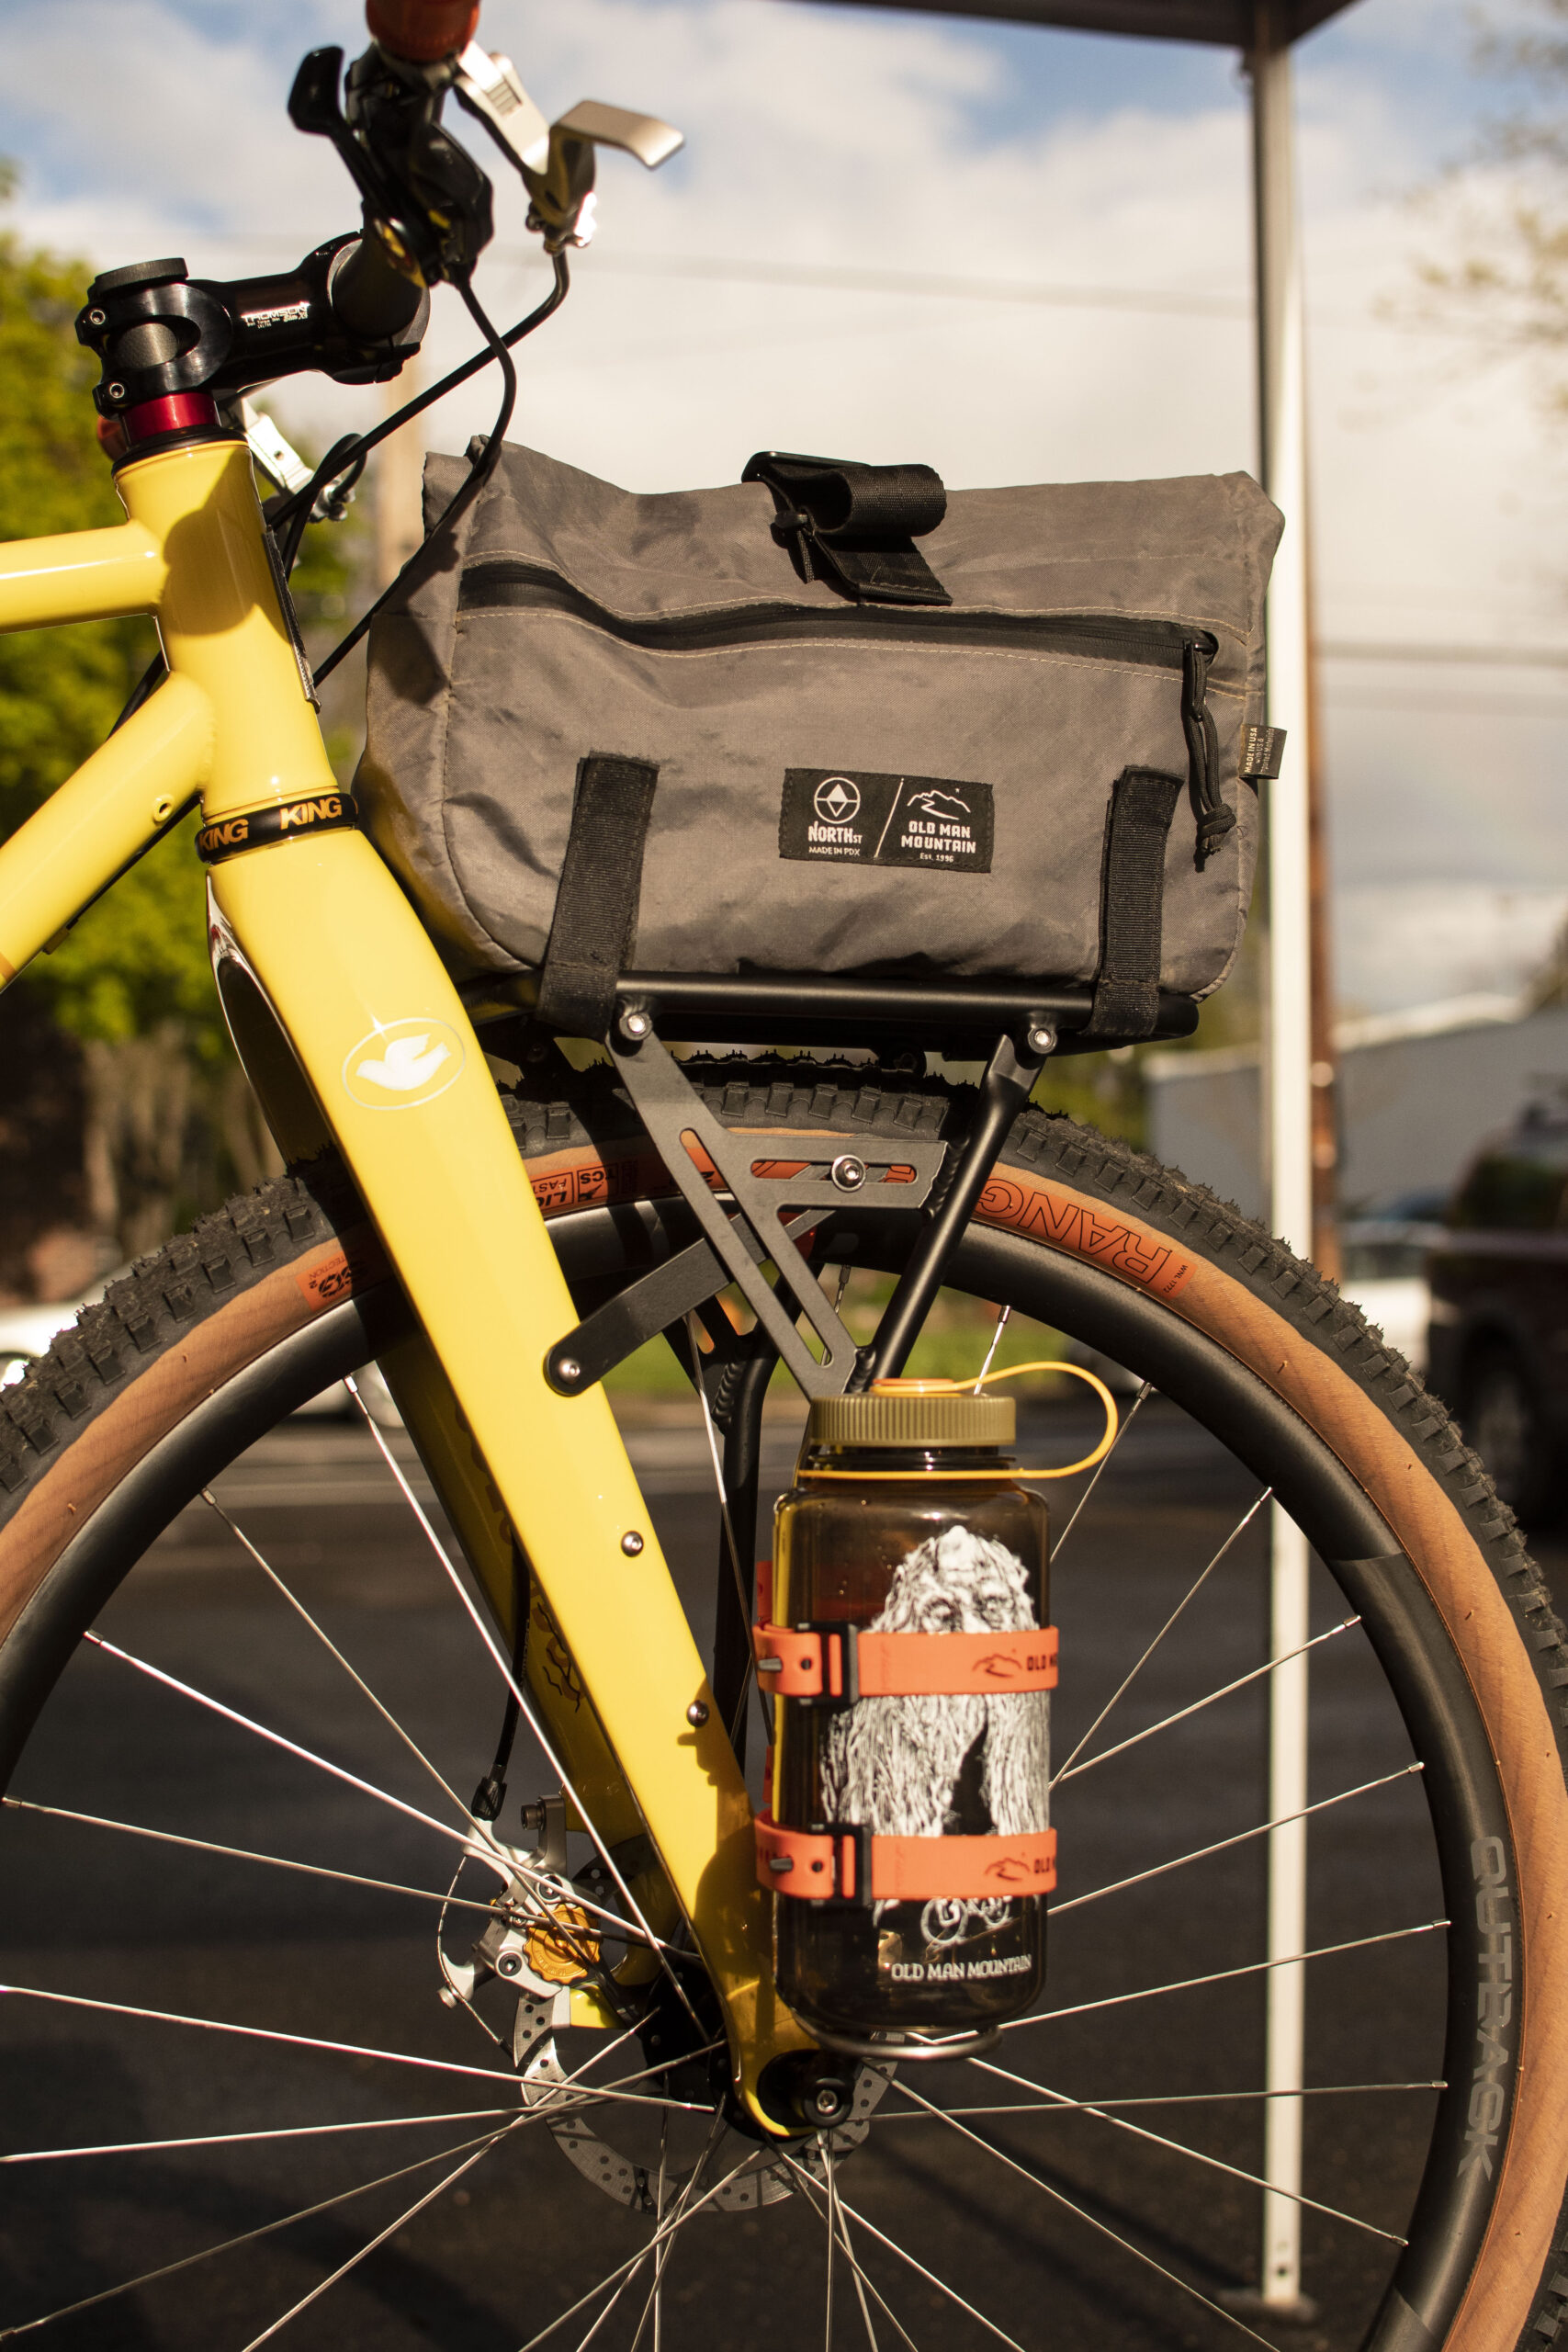 Elkhorn mounted on the front with our North Street trunk bag and King Cage